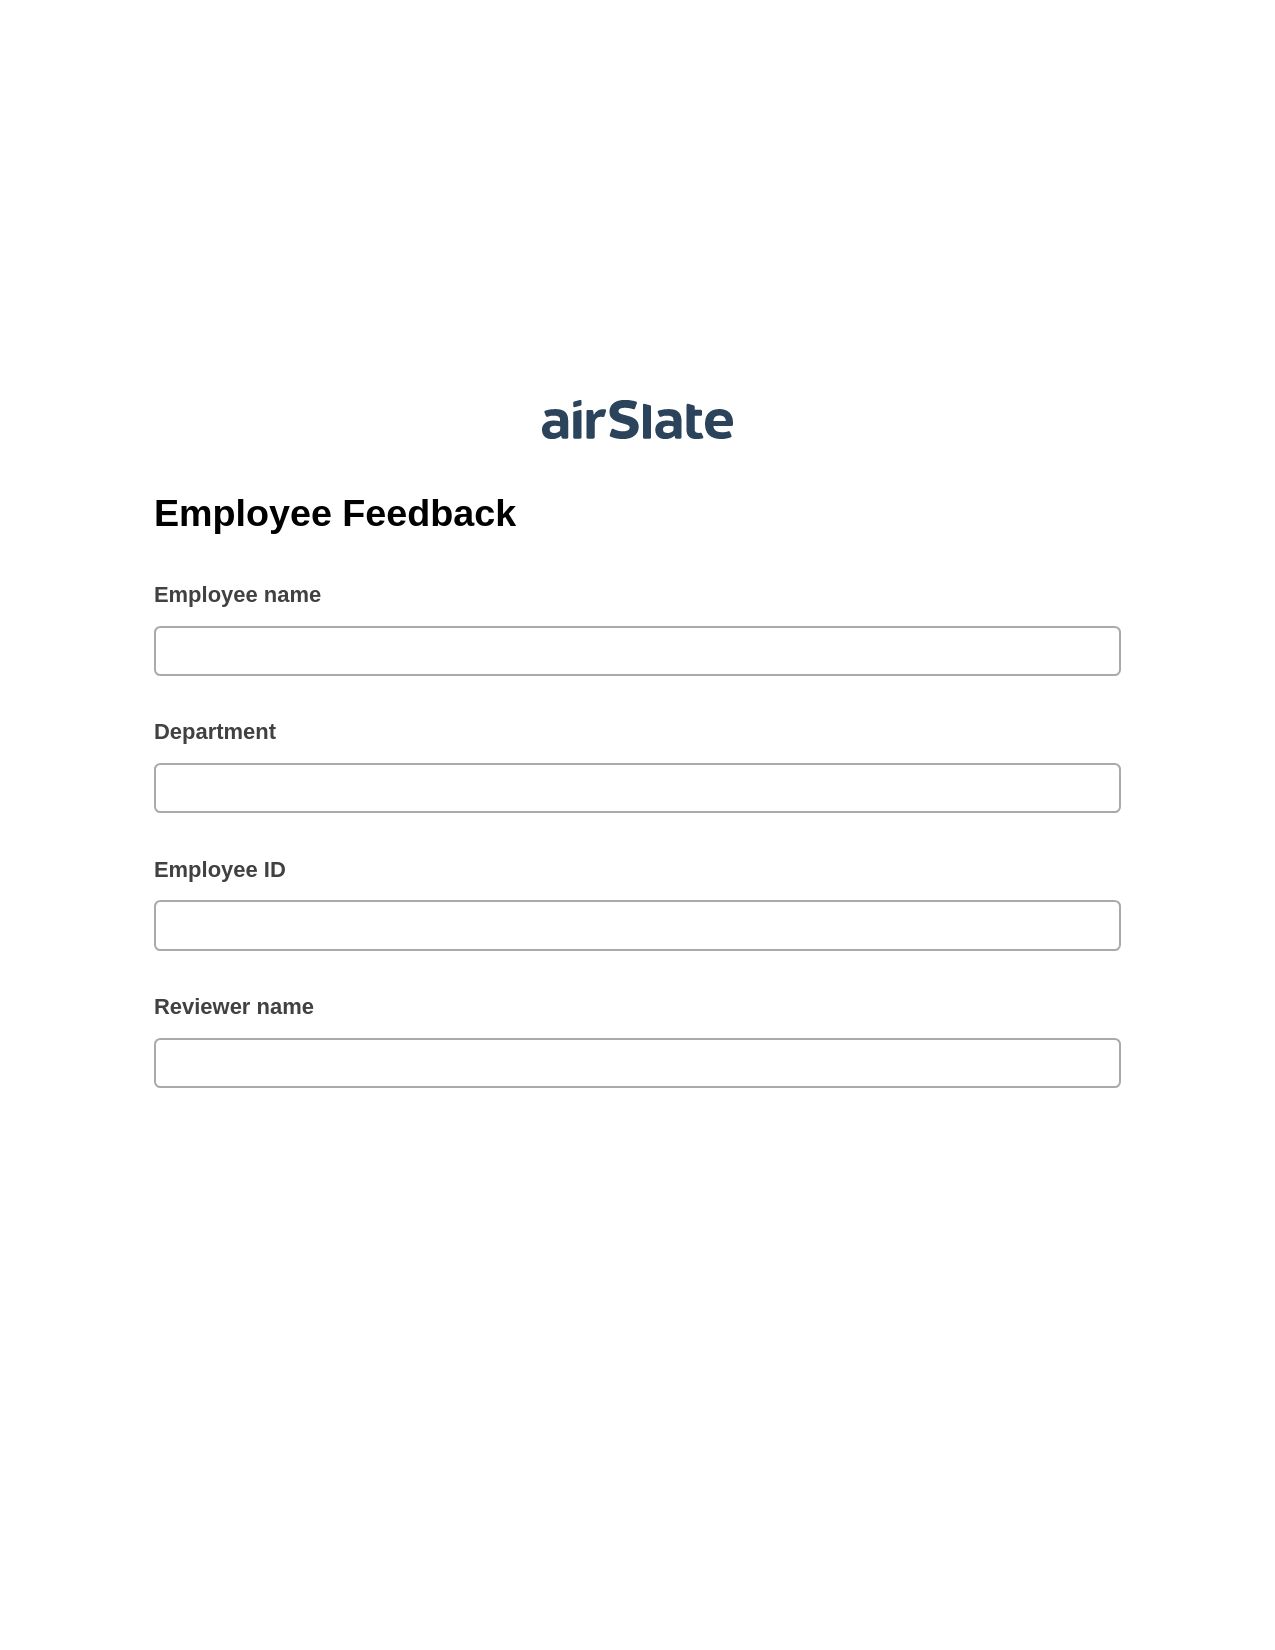 Employee Feedback Pre-fill from MySQL Dropdown Options Bot, Add Tags to Slate Bot, Export to Salesforce Bot